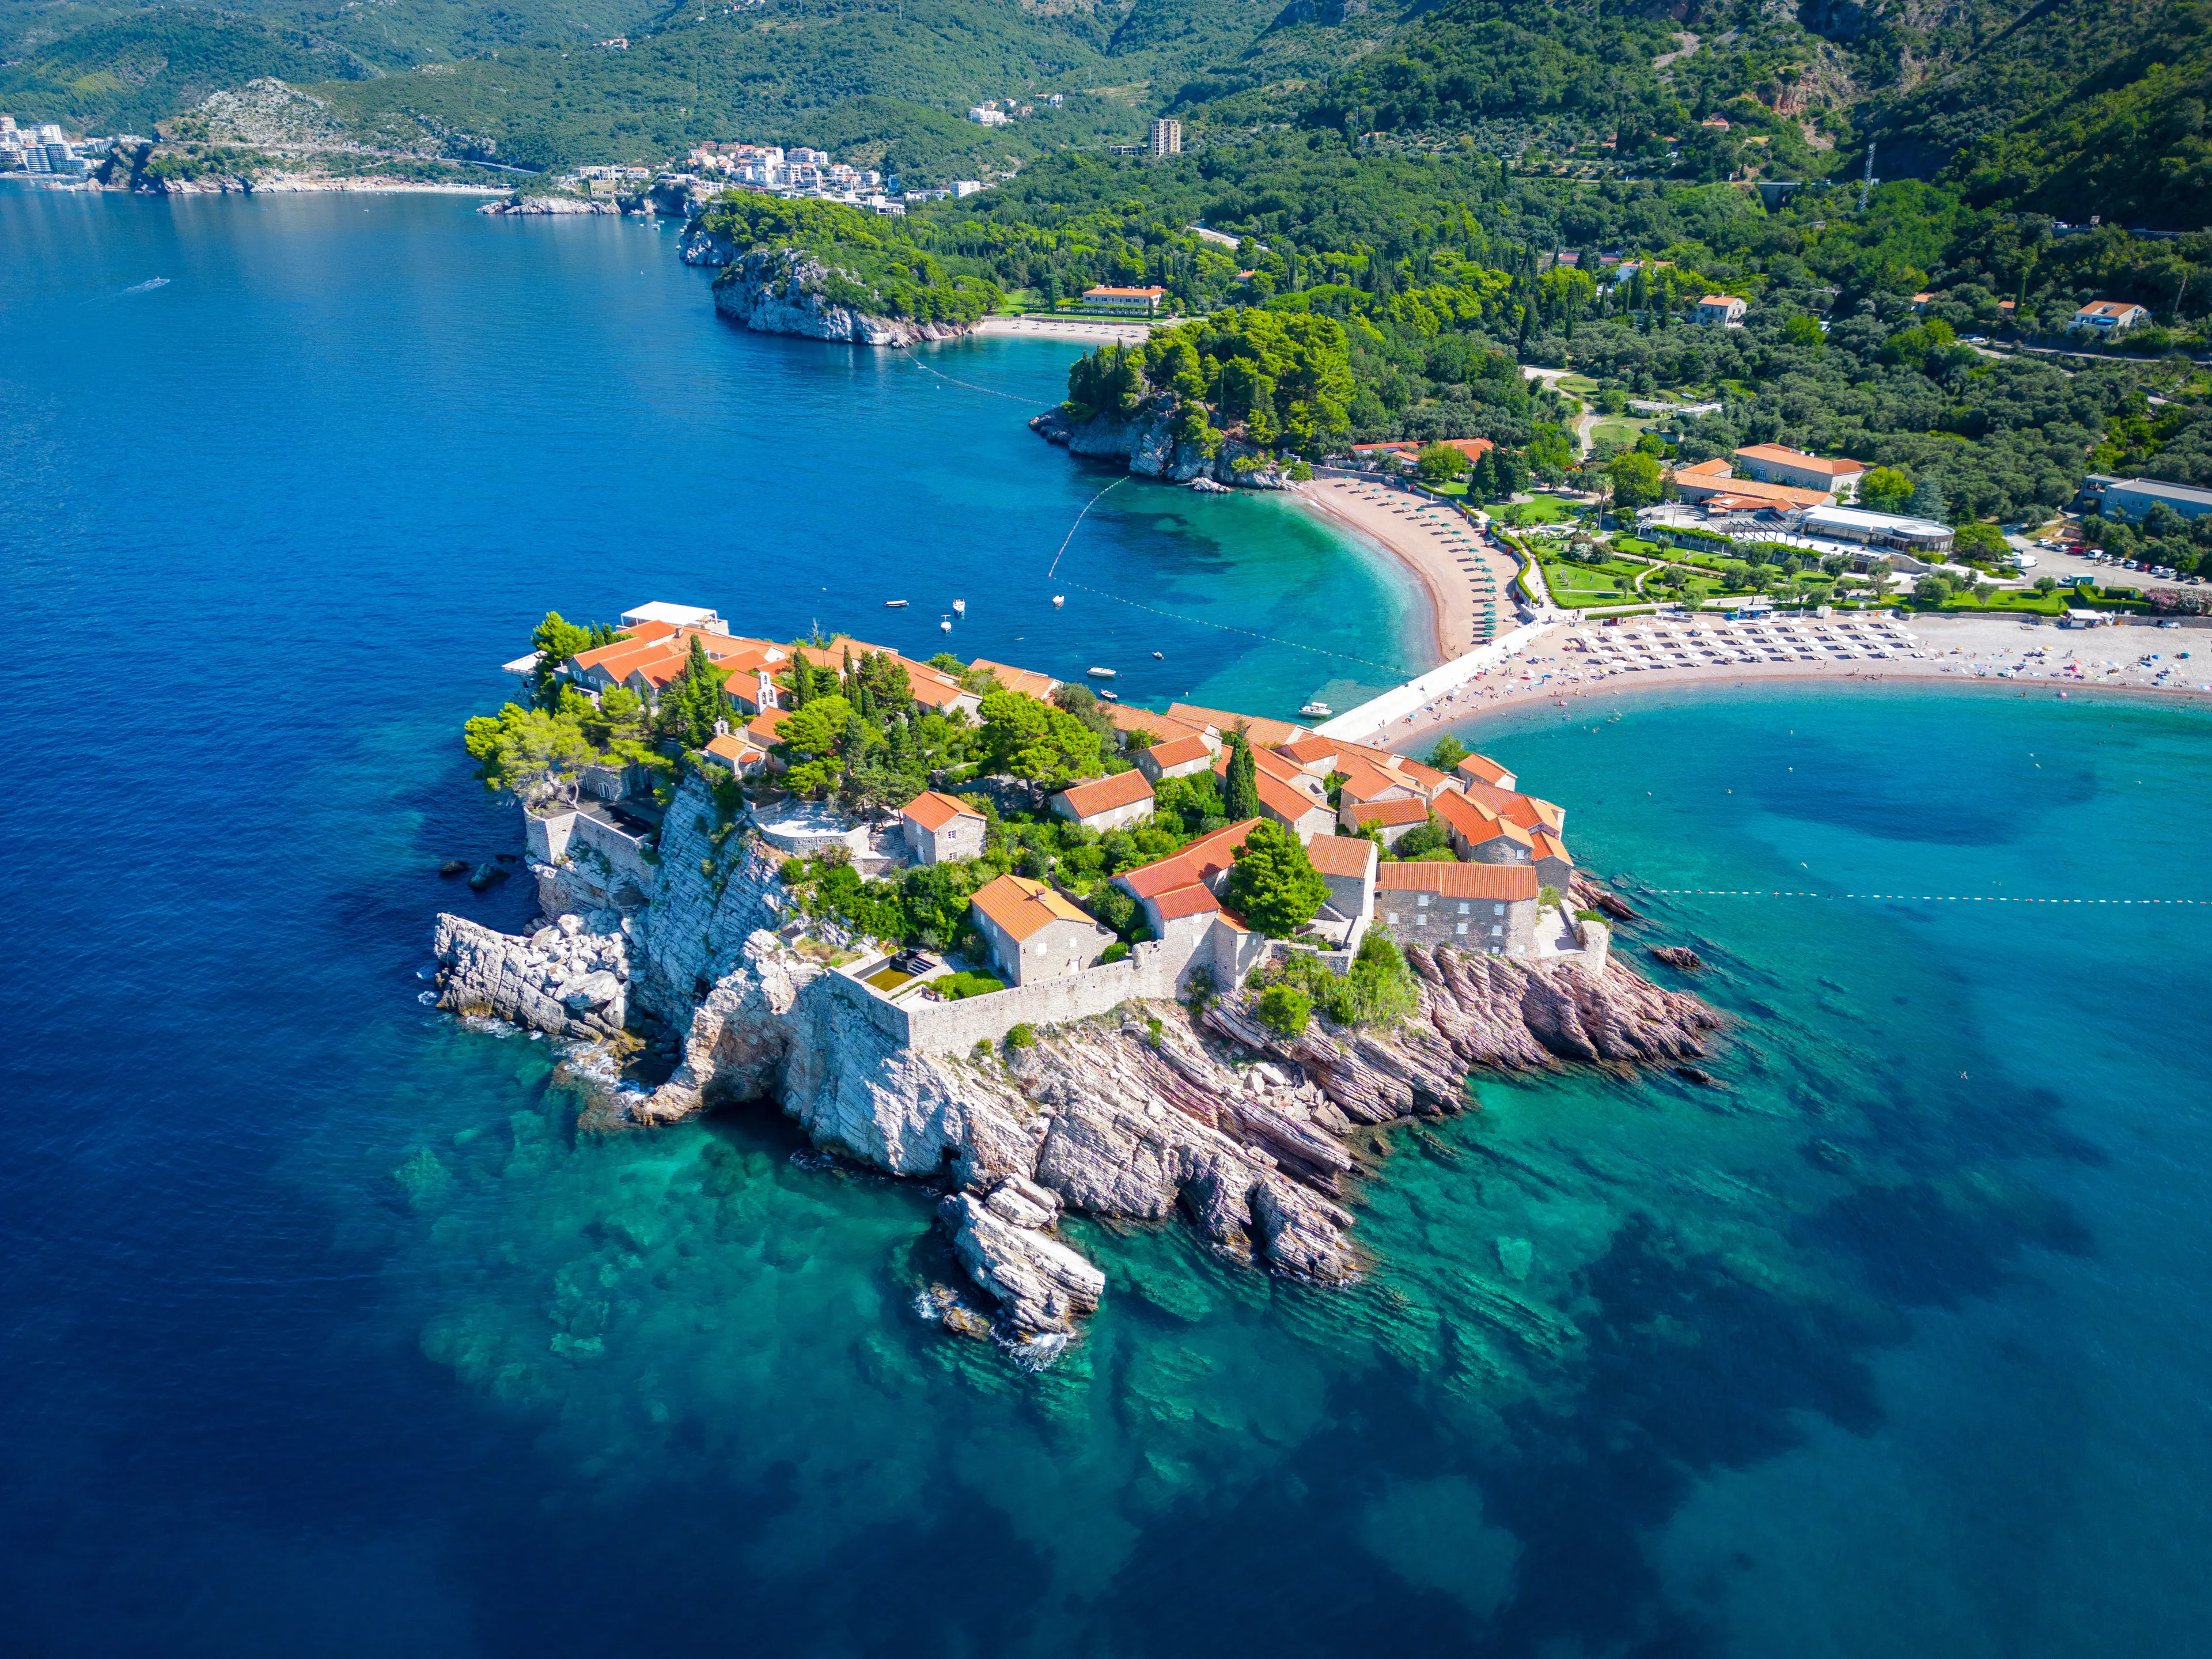 4-Day Relaxing Family Excursion in Budva: A Local's Guide